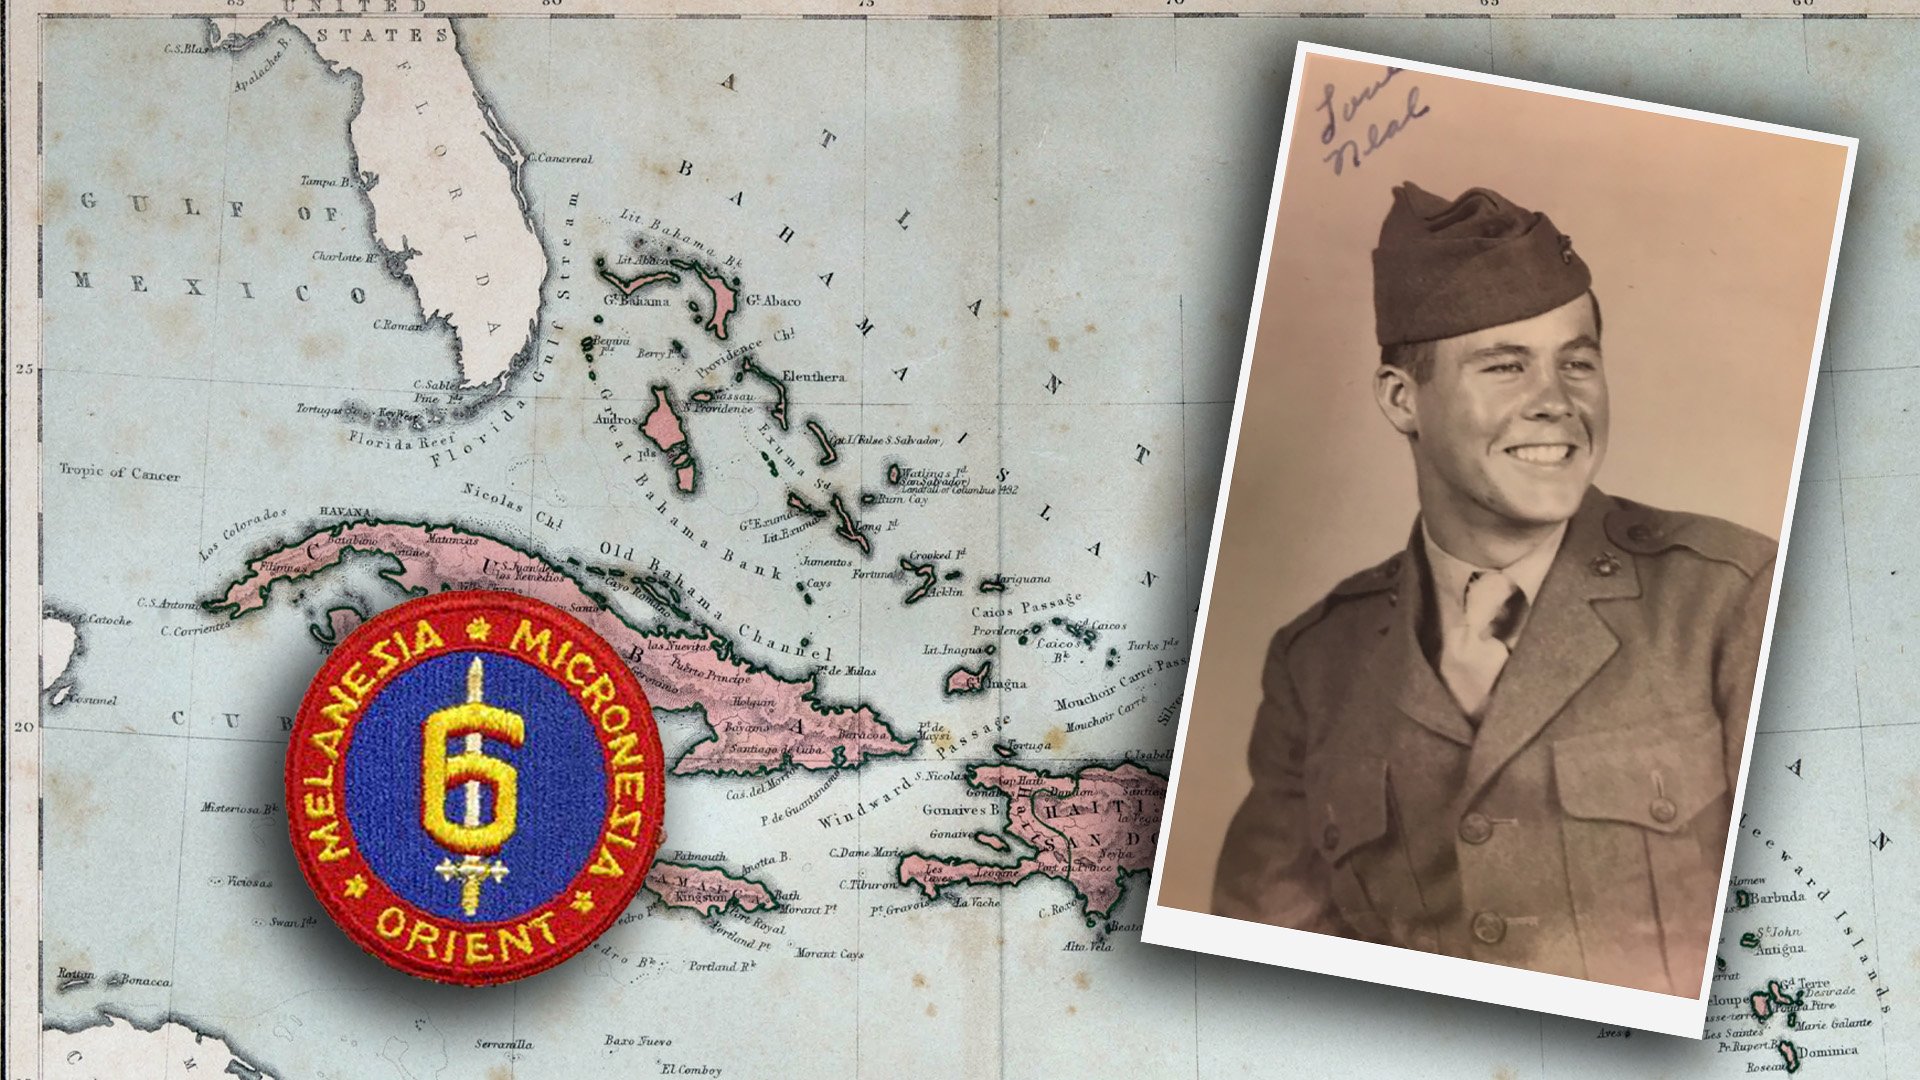 Neal McCallum served with 6th Marine Division at Okinawa during World War II and later continued living a life of great adventure courtesy of Uncle Sam. Adobe stock photo and photo courtesy of Neal McCallum. Composite by Coffee or Die Magazine.